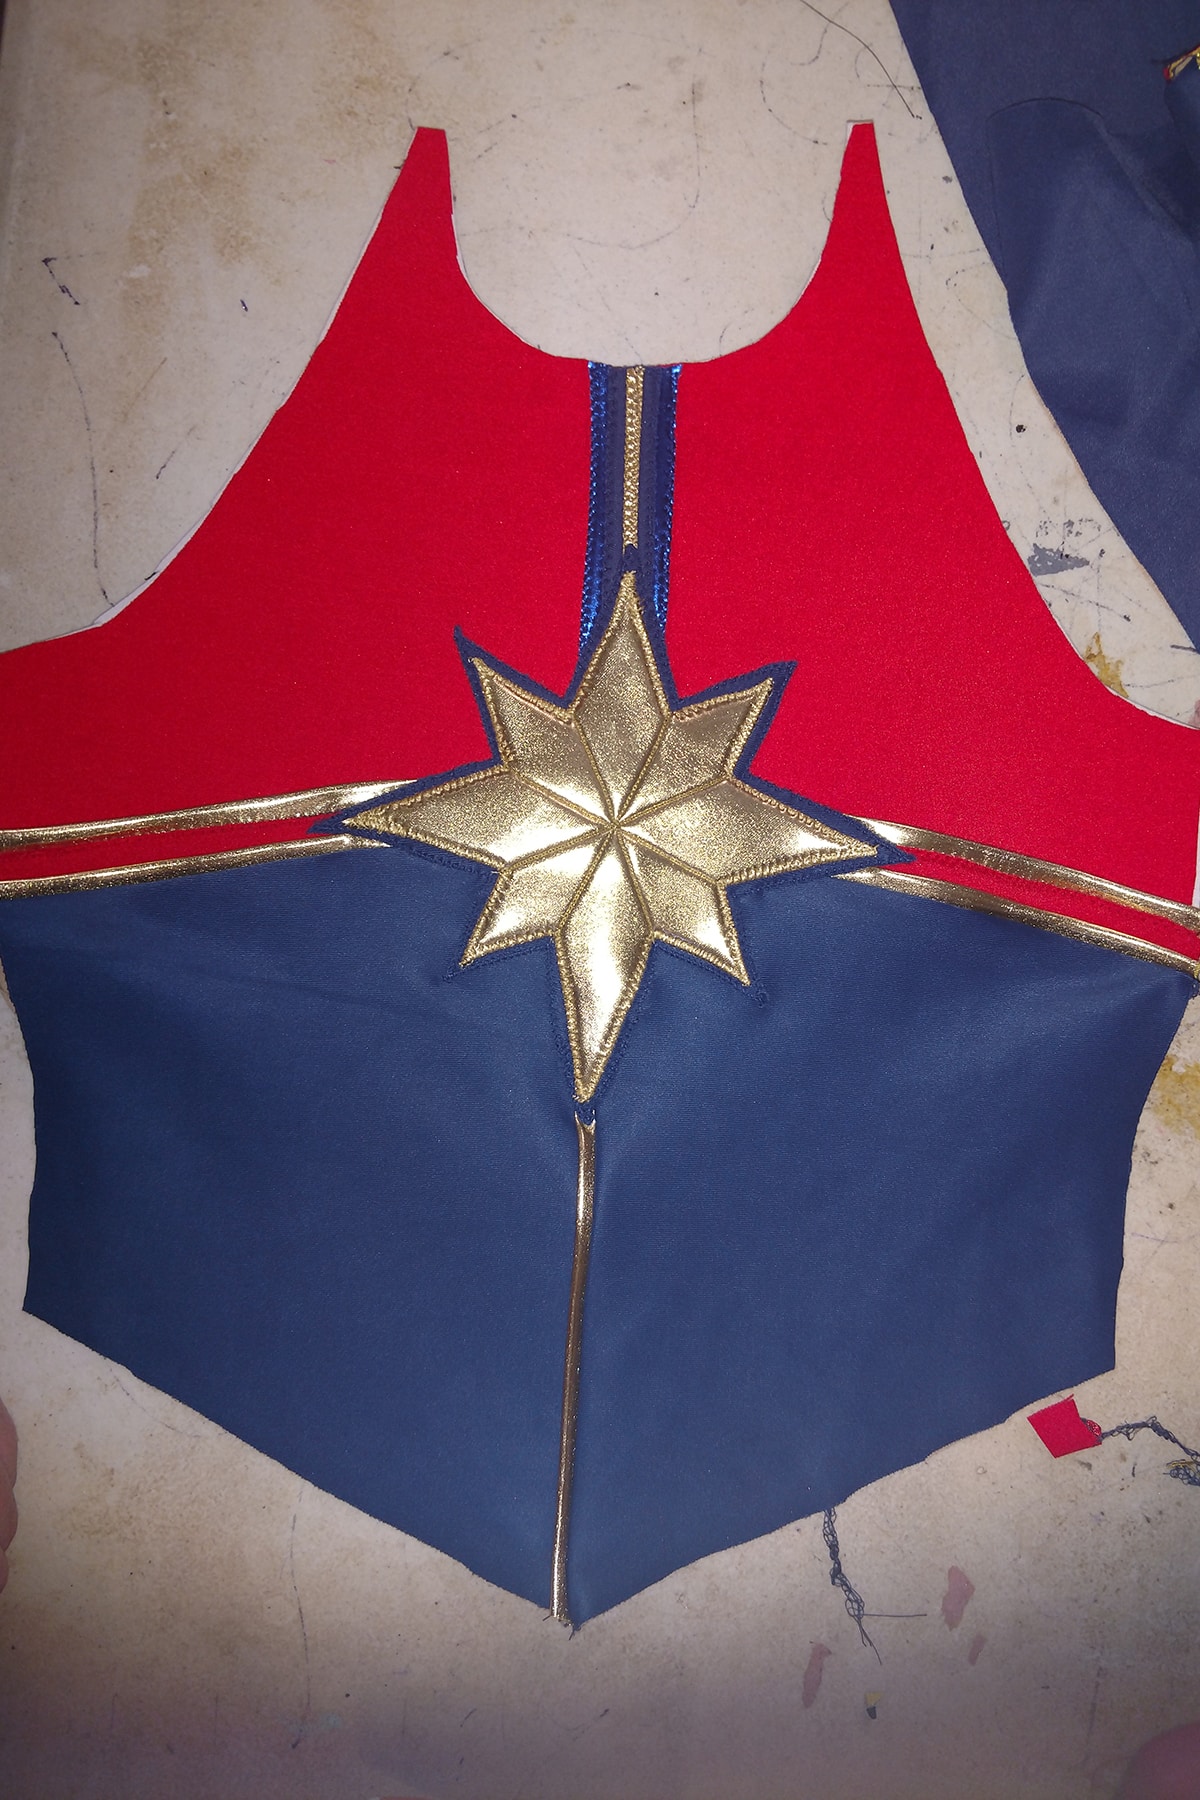 The padded star applique sewn down to the Captain Marvel costume.